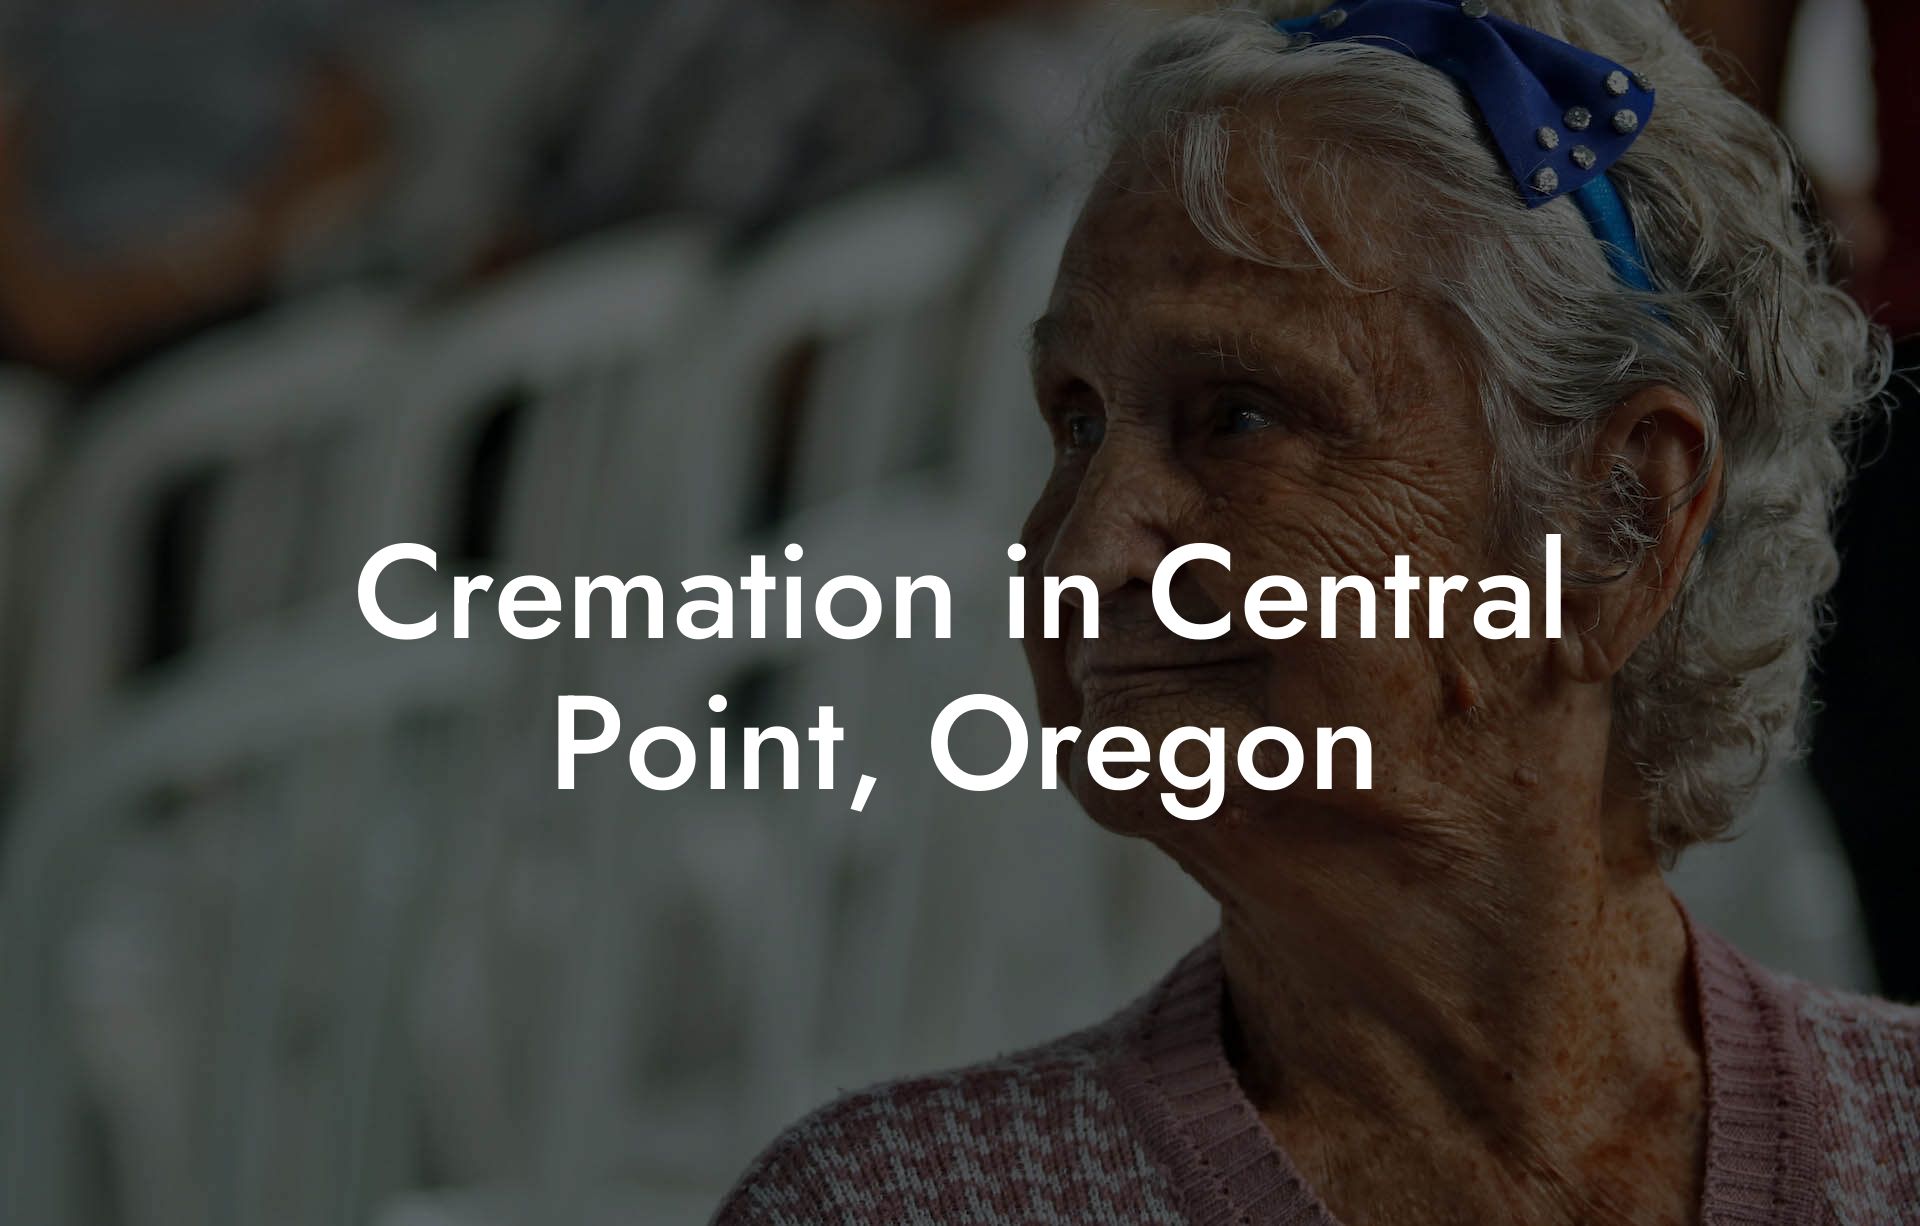 Cremation in Central Point, Oregon